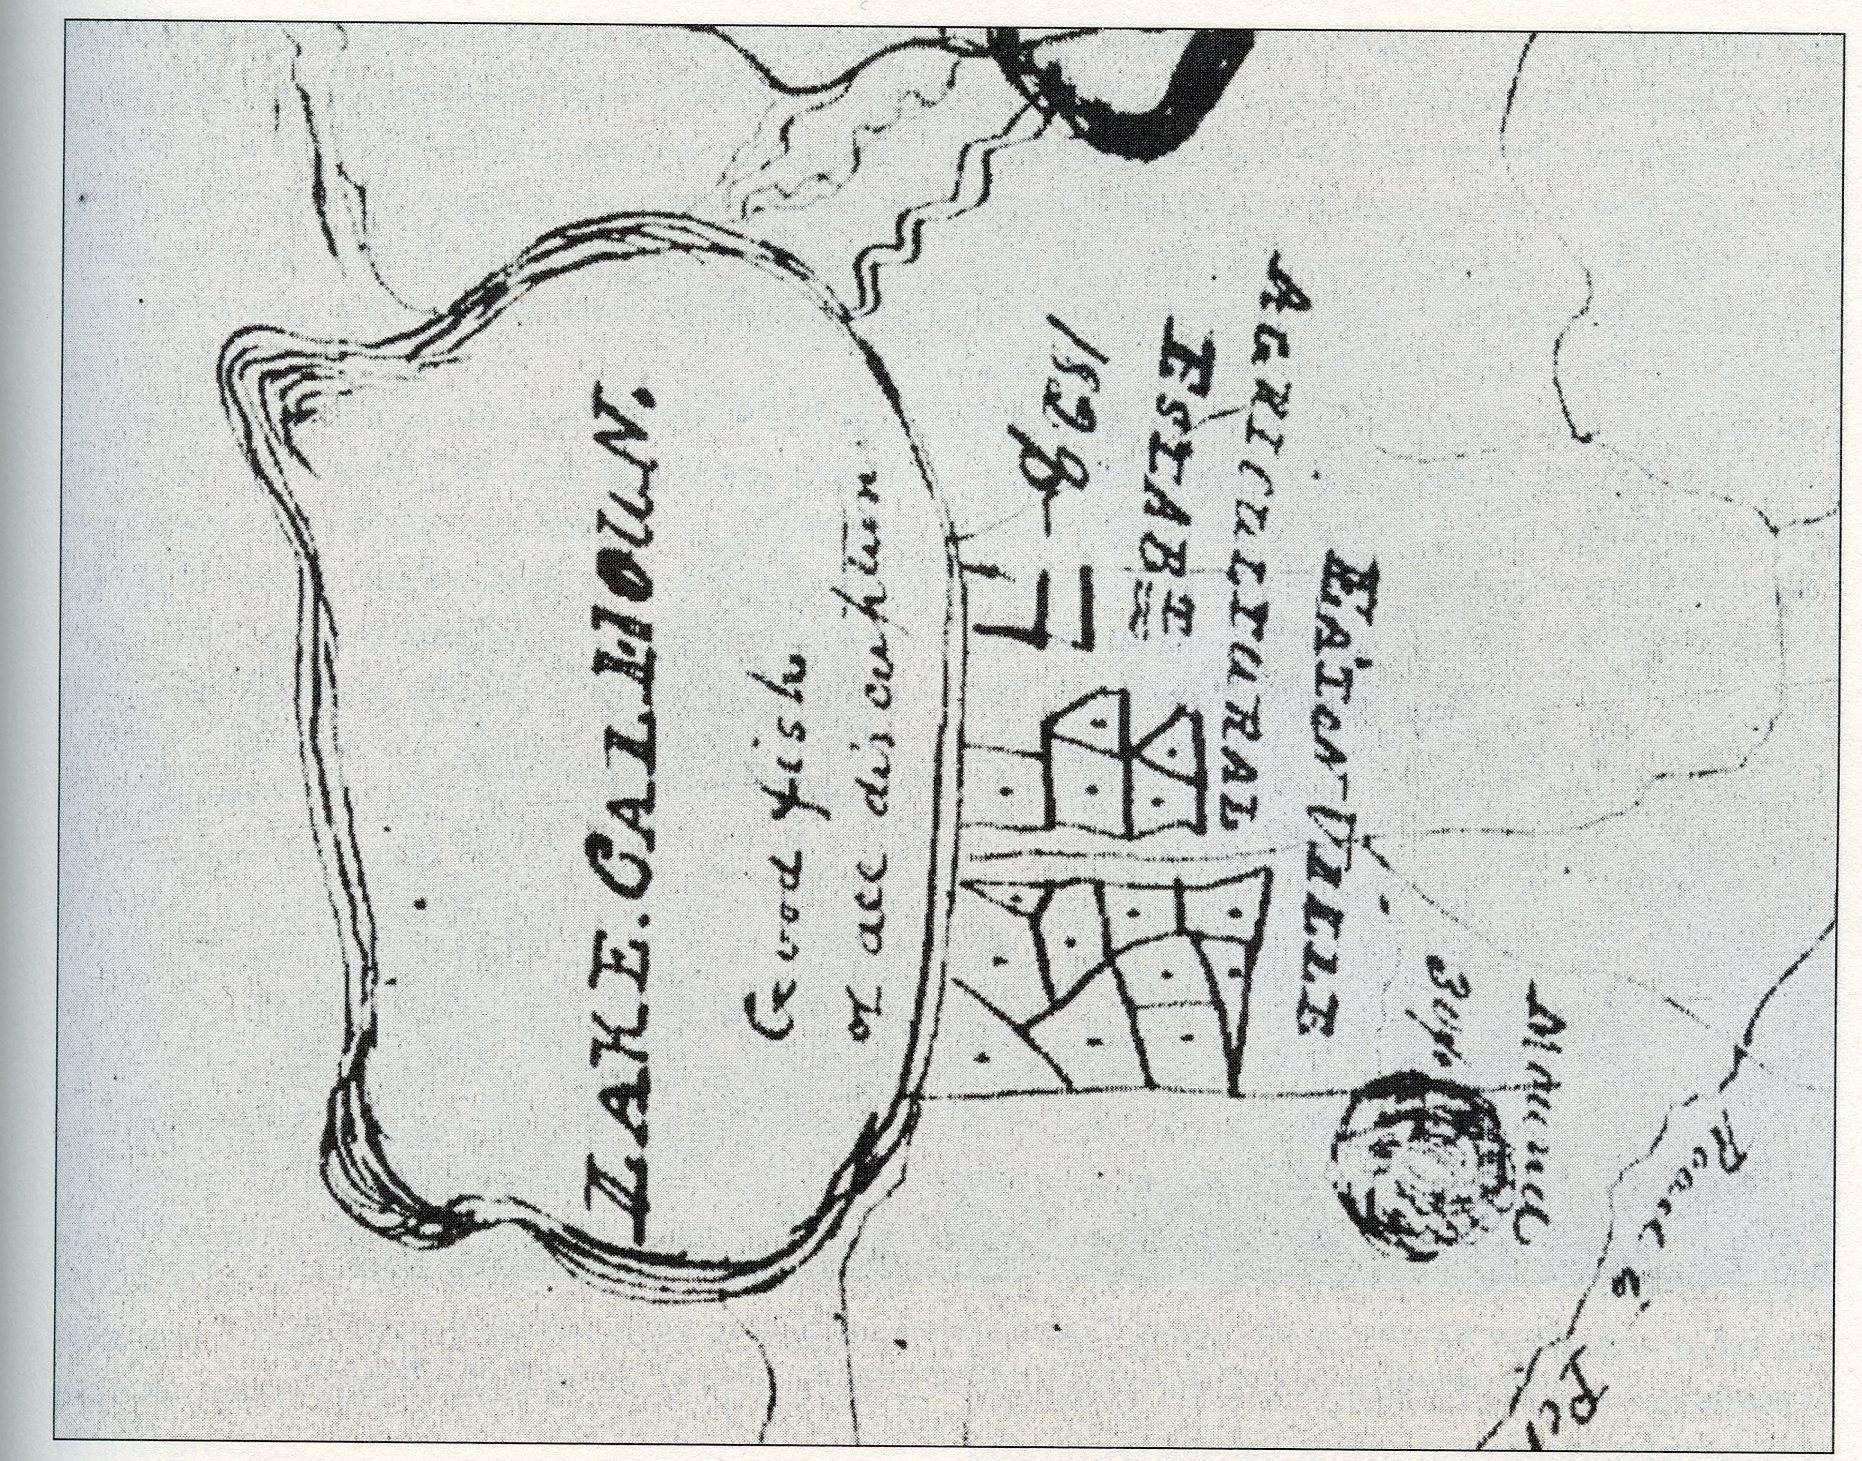 taliaferro's map of lake calhoun, from white and westerman's book001